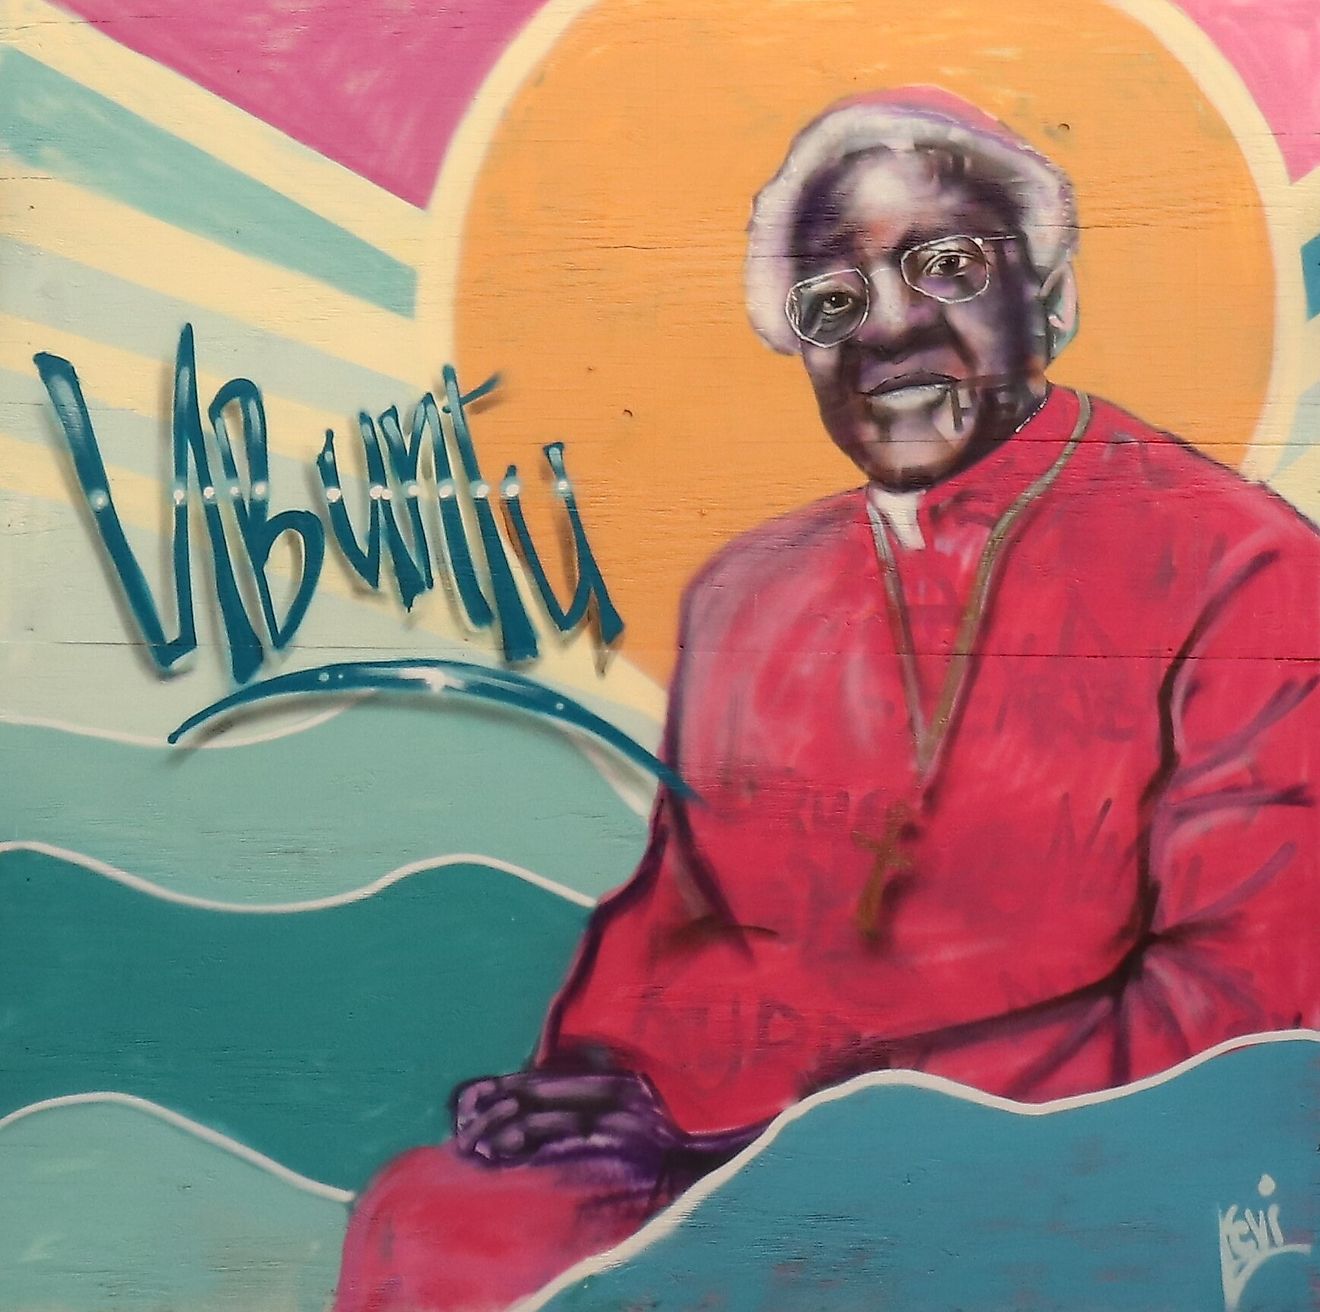 Archbishop Desmond Tutu is often associated with "ubuntu theology", By Elvert Barnes - https://www.flickr.com/photos/perspective/50575755041/, CC BY-SA 2.0, https://commons.wikimedia.org/w/index.php?curid=150402685